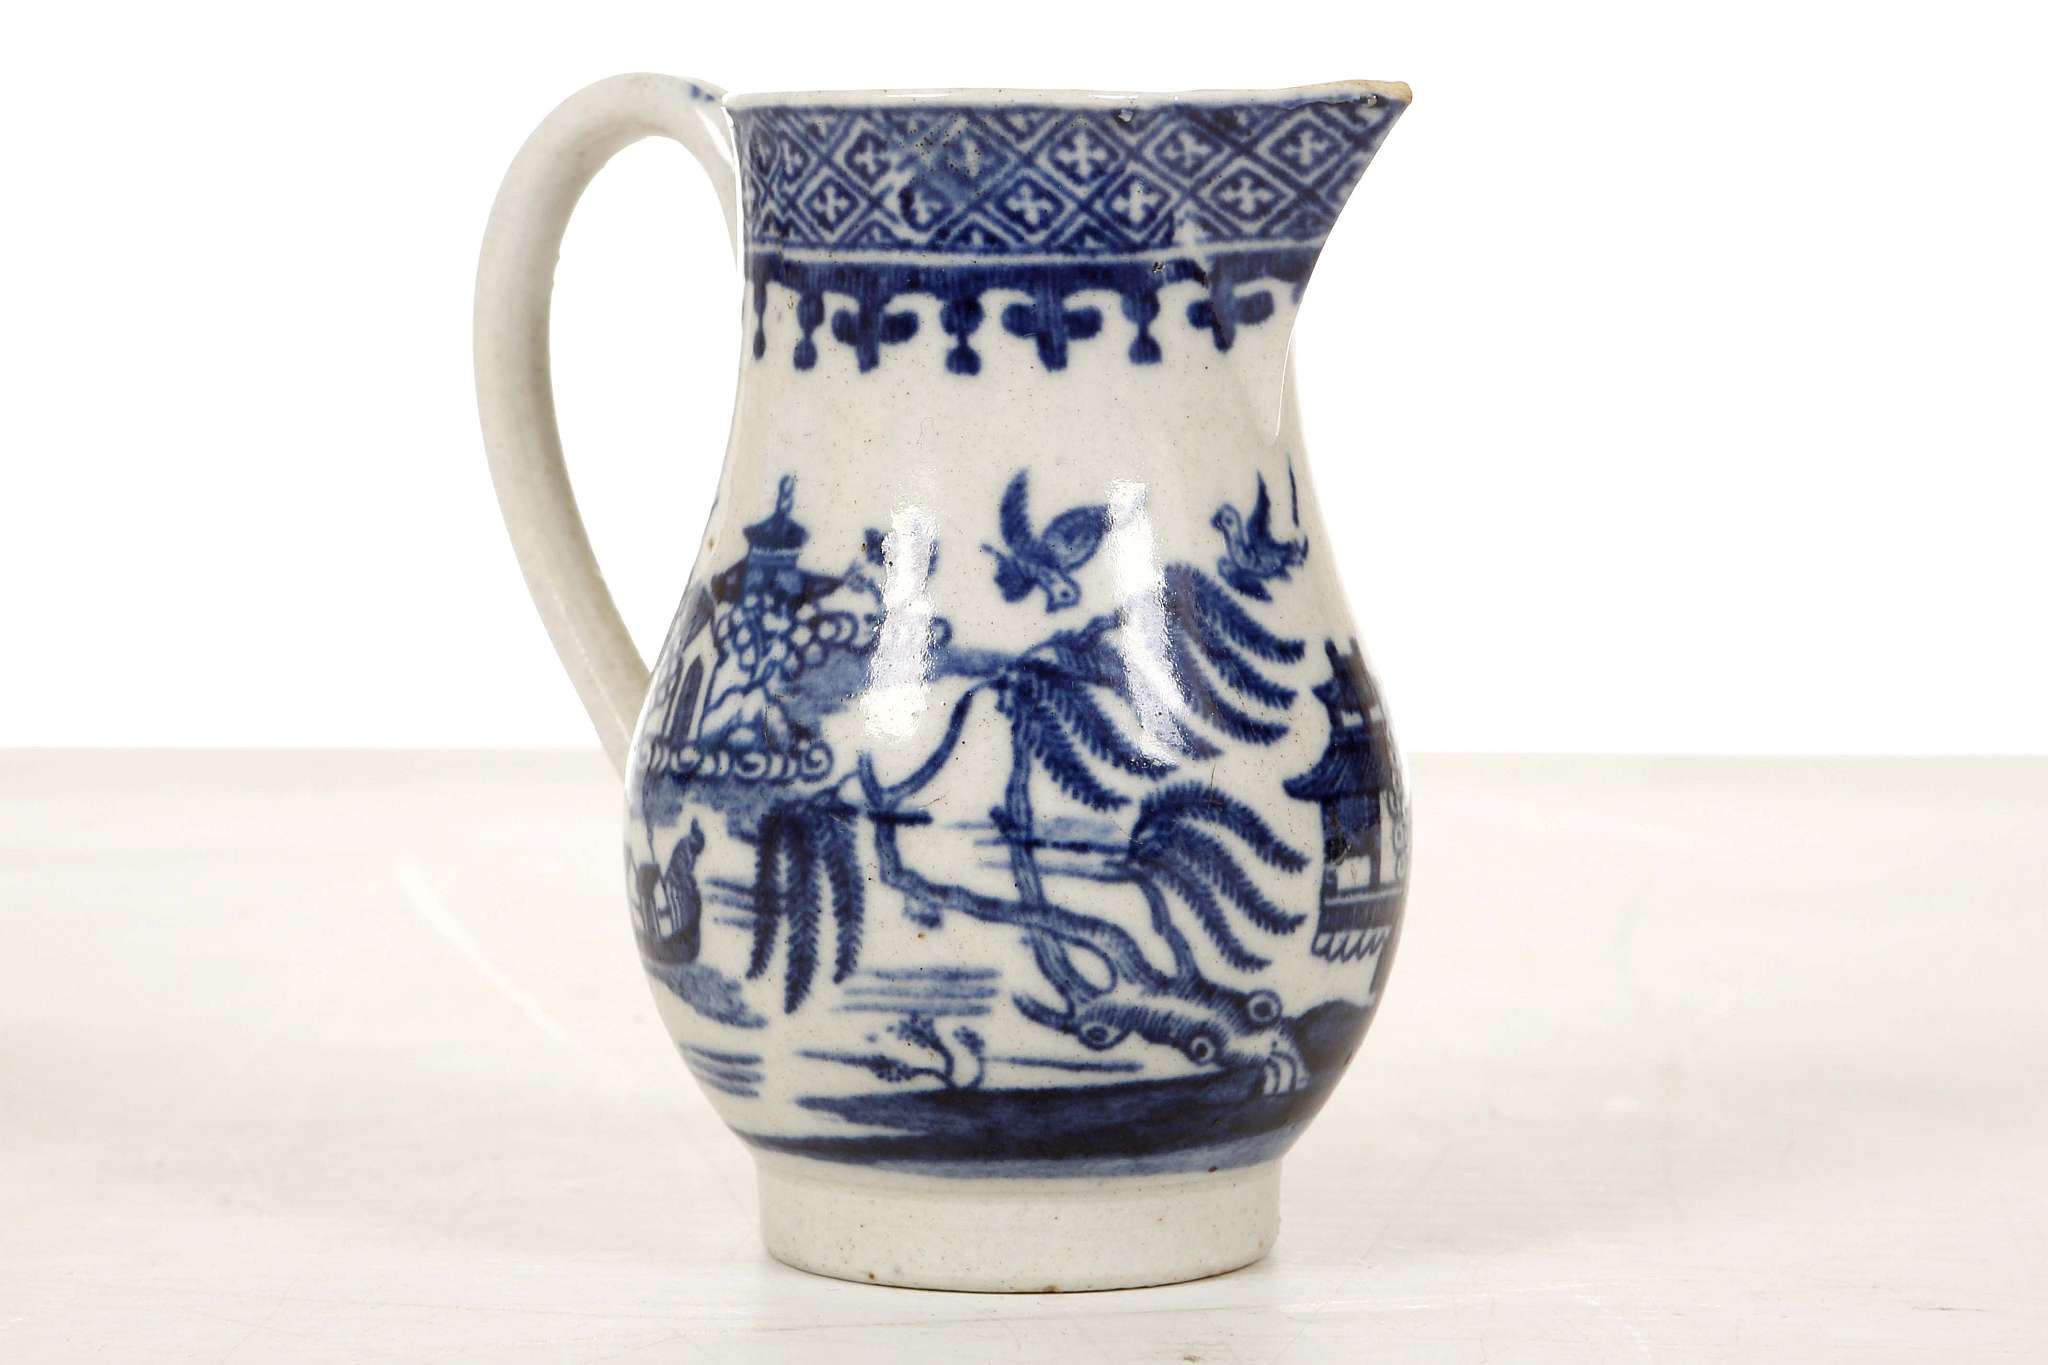 A RARE AND UNUSUAL ENGLISH CREAM JUG, 18th century, possibly Liverpool, of sparrow beak form with